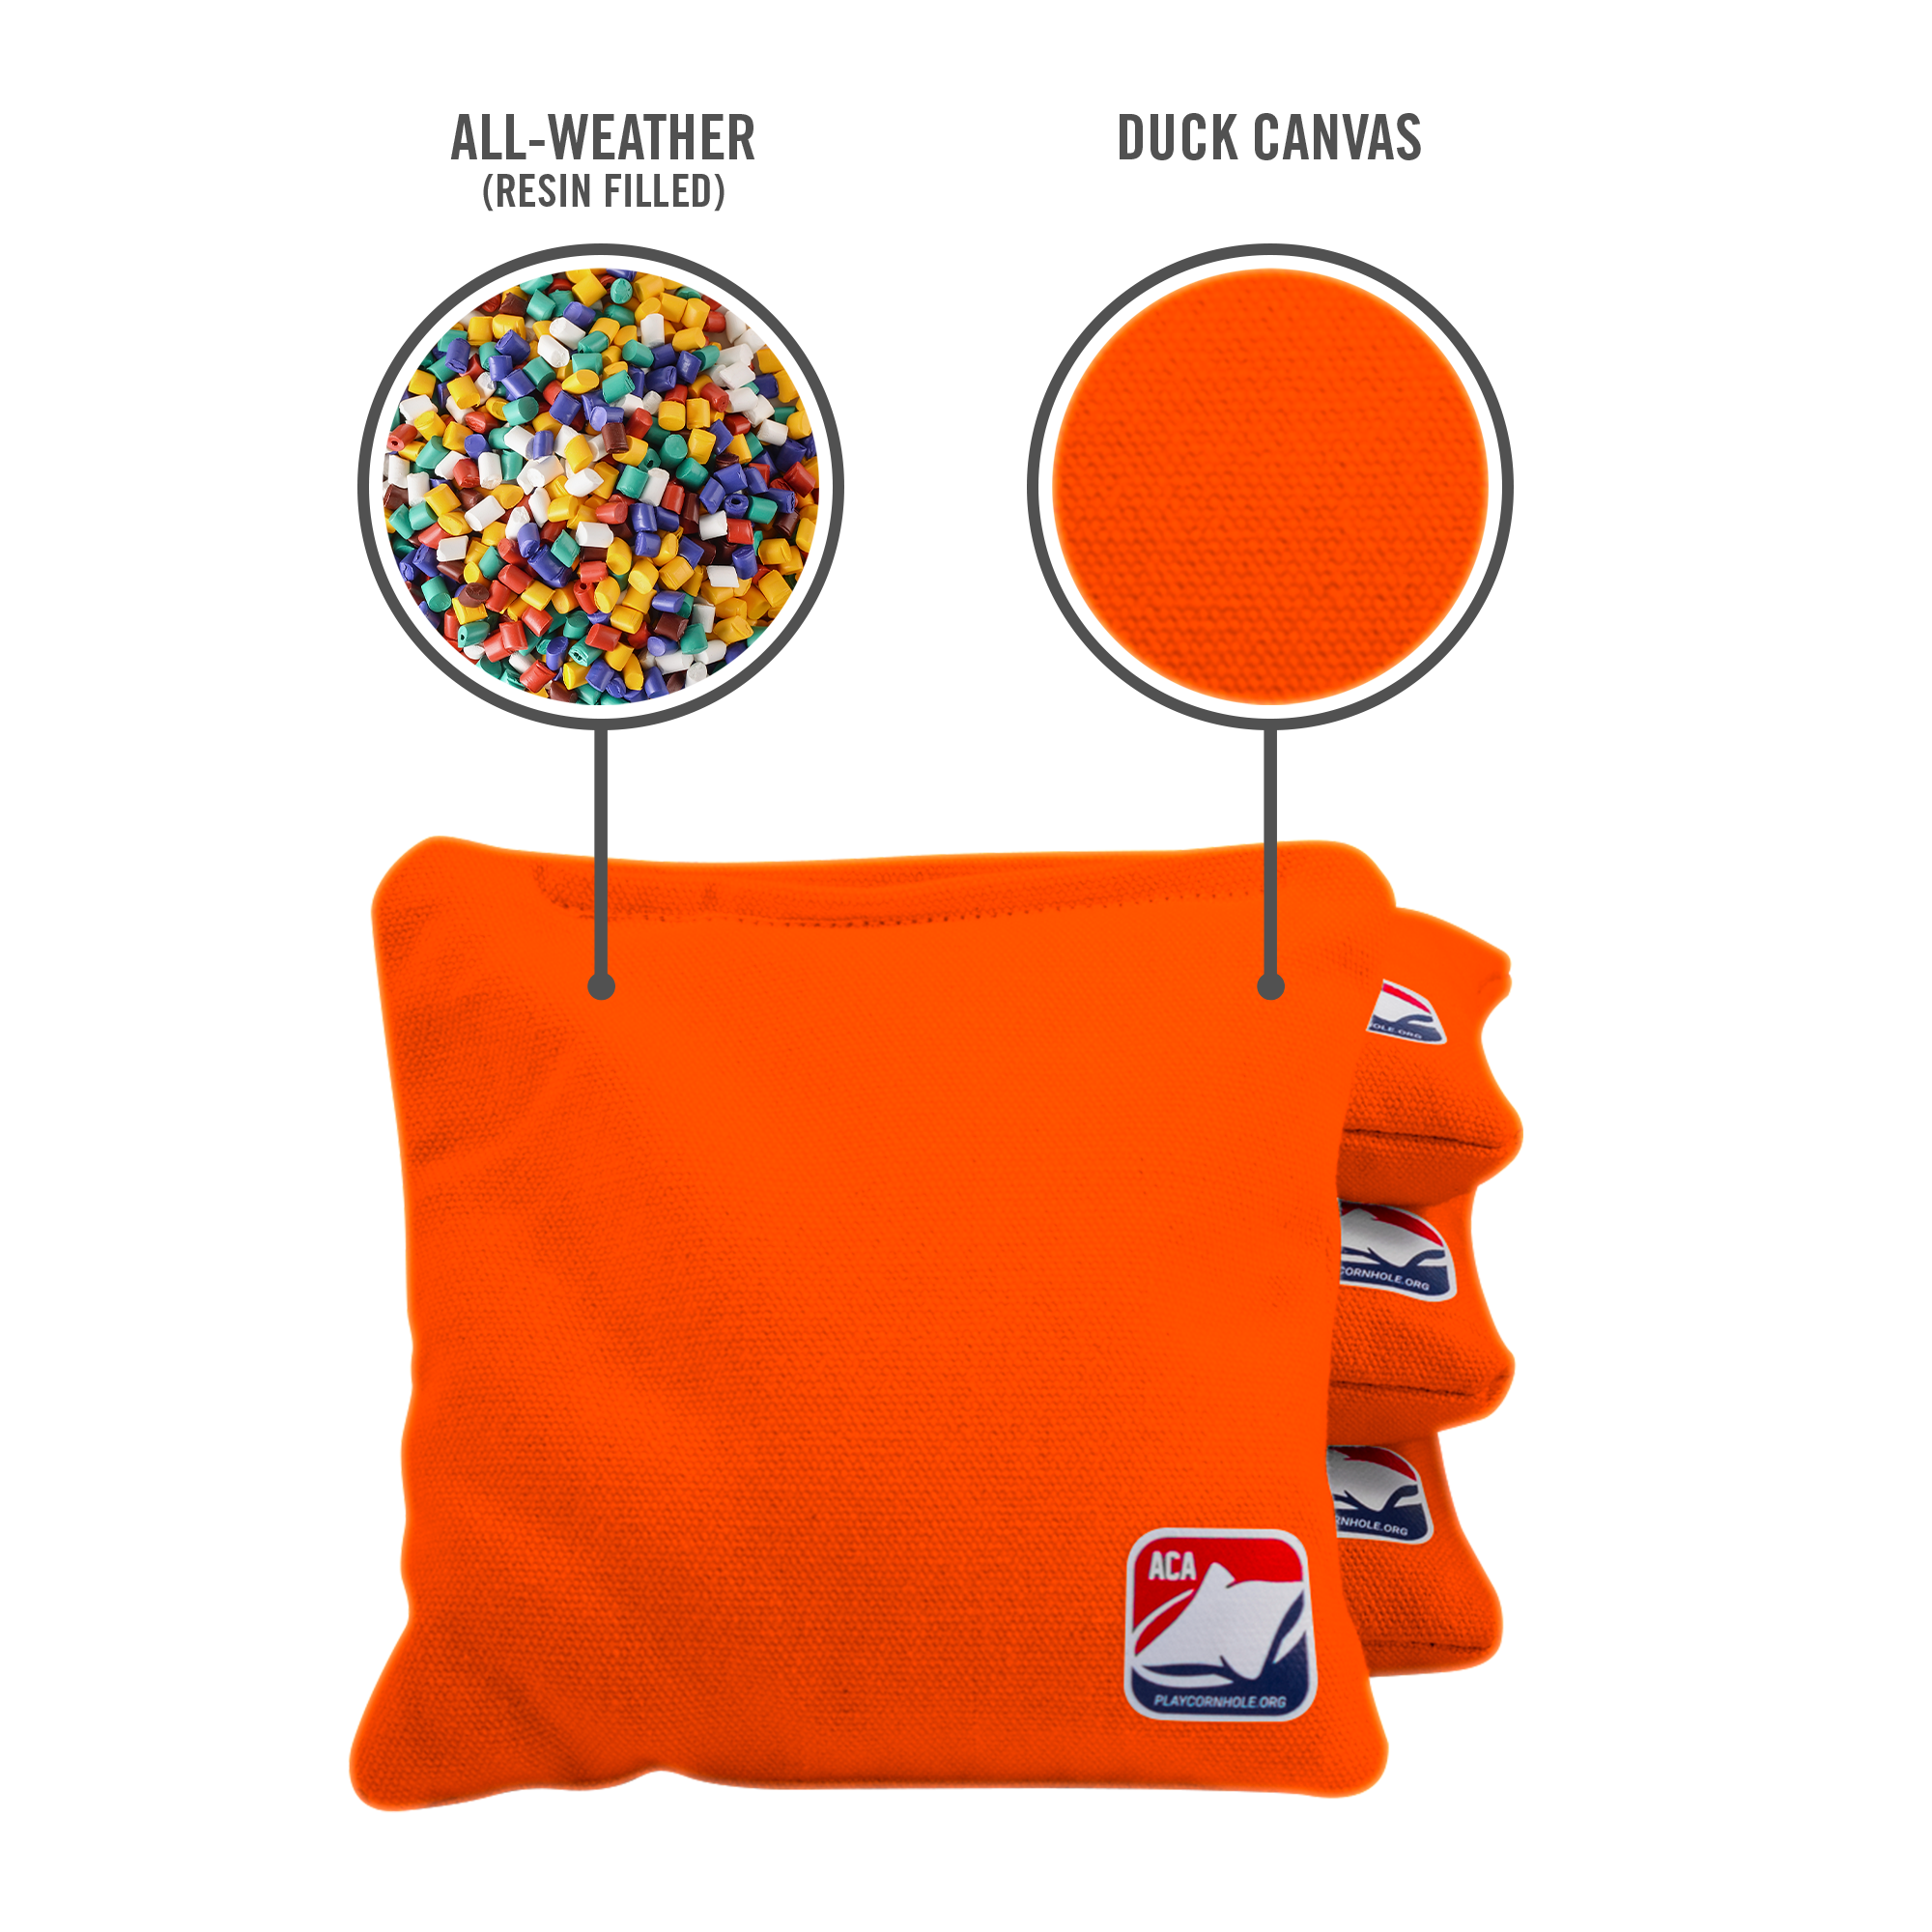 6-in Daily 66x Orange Competition Regulation Cornhole Bags